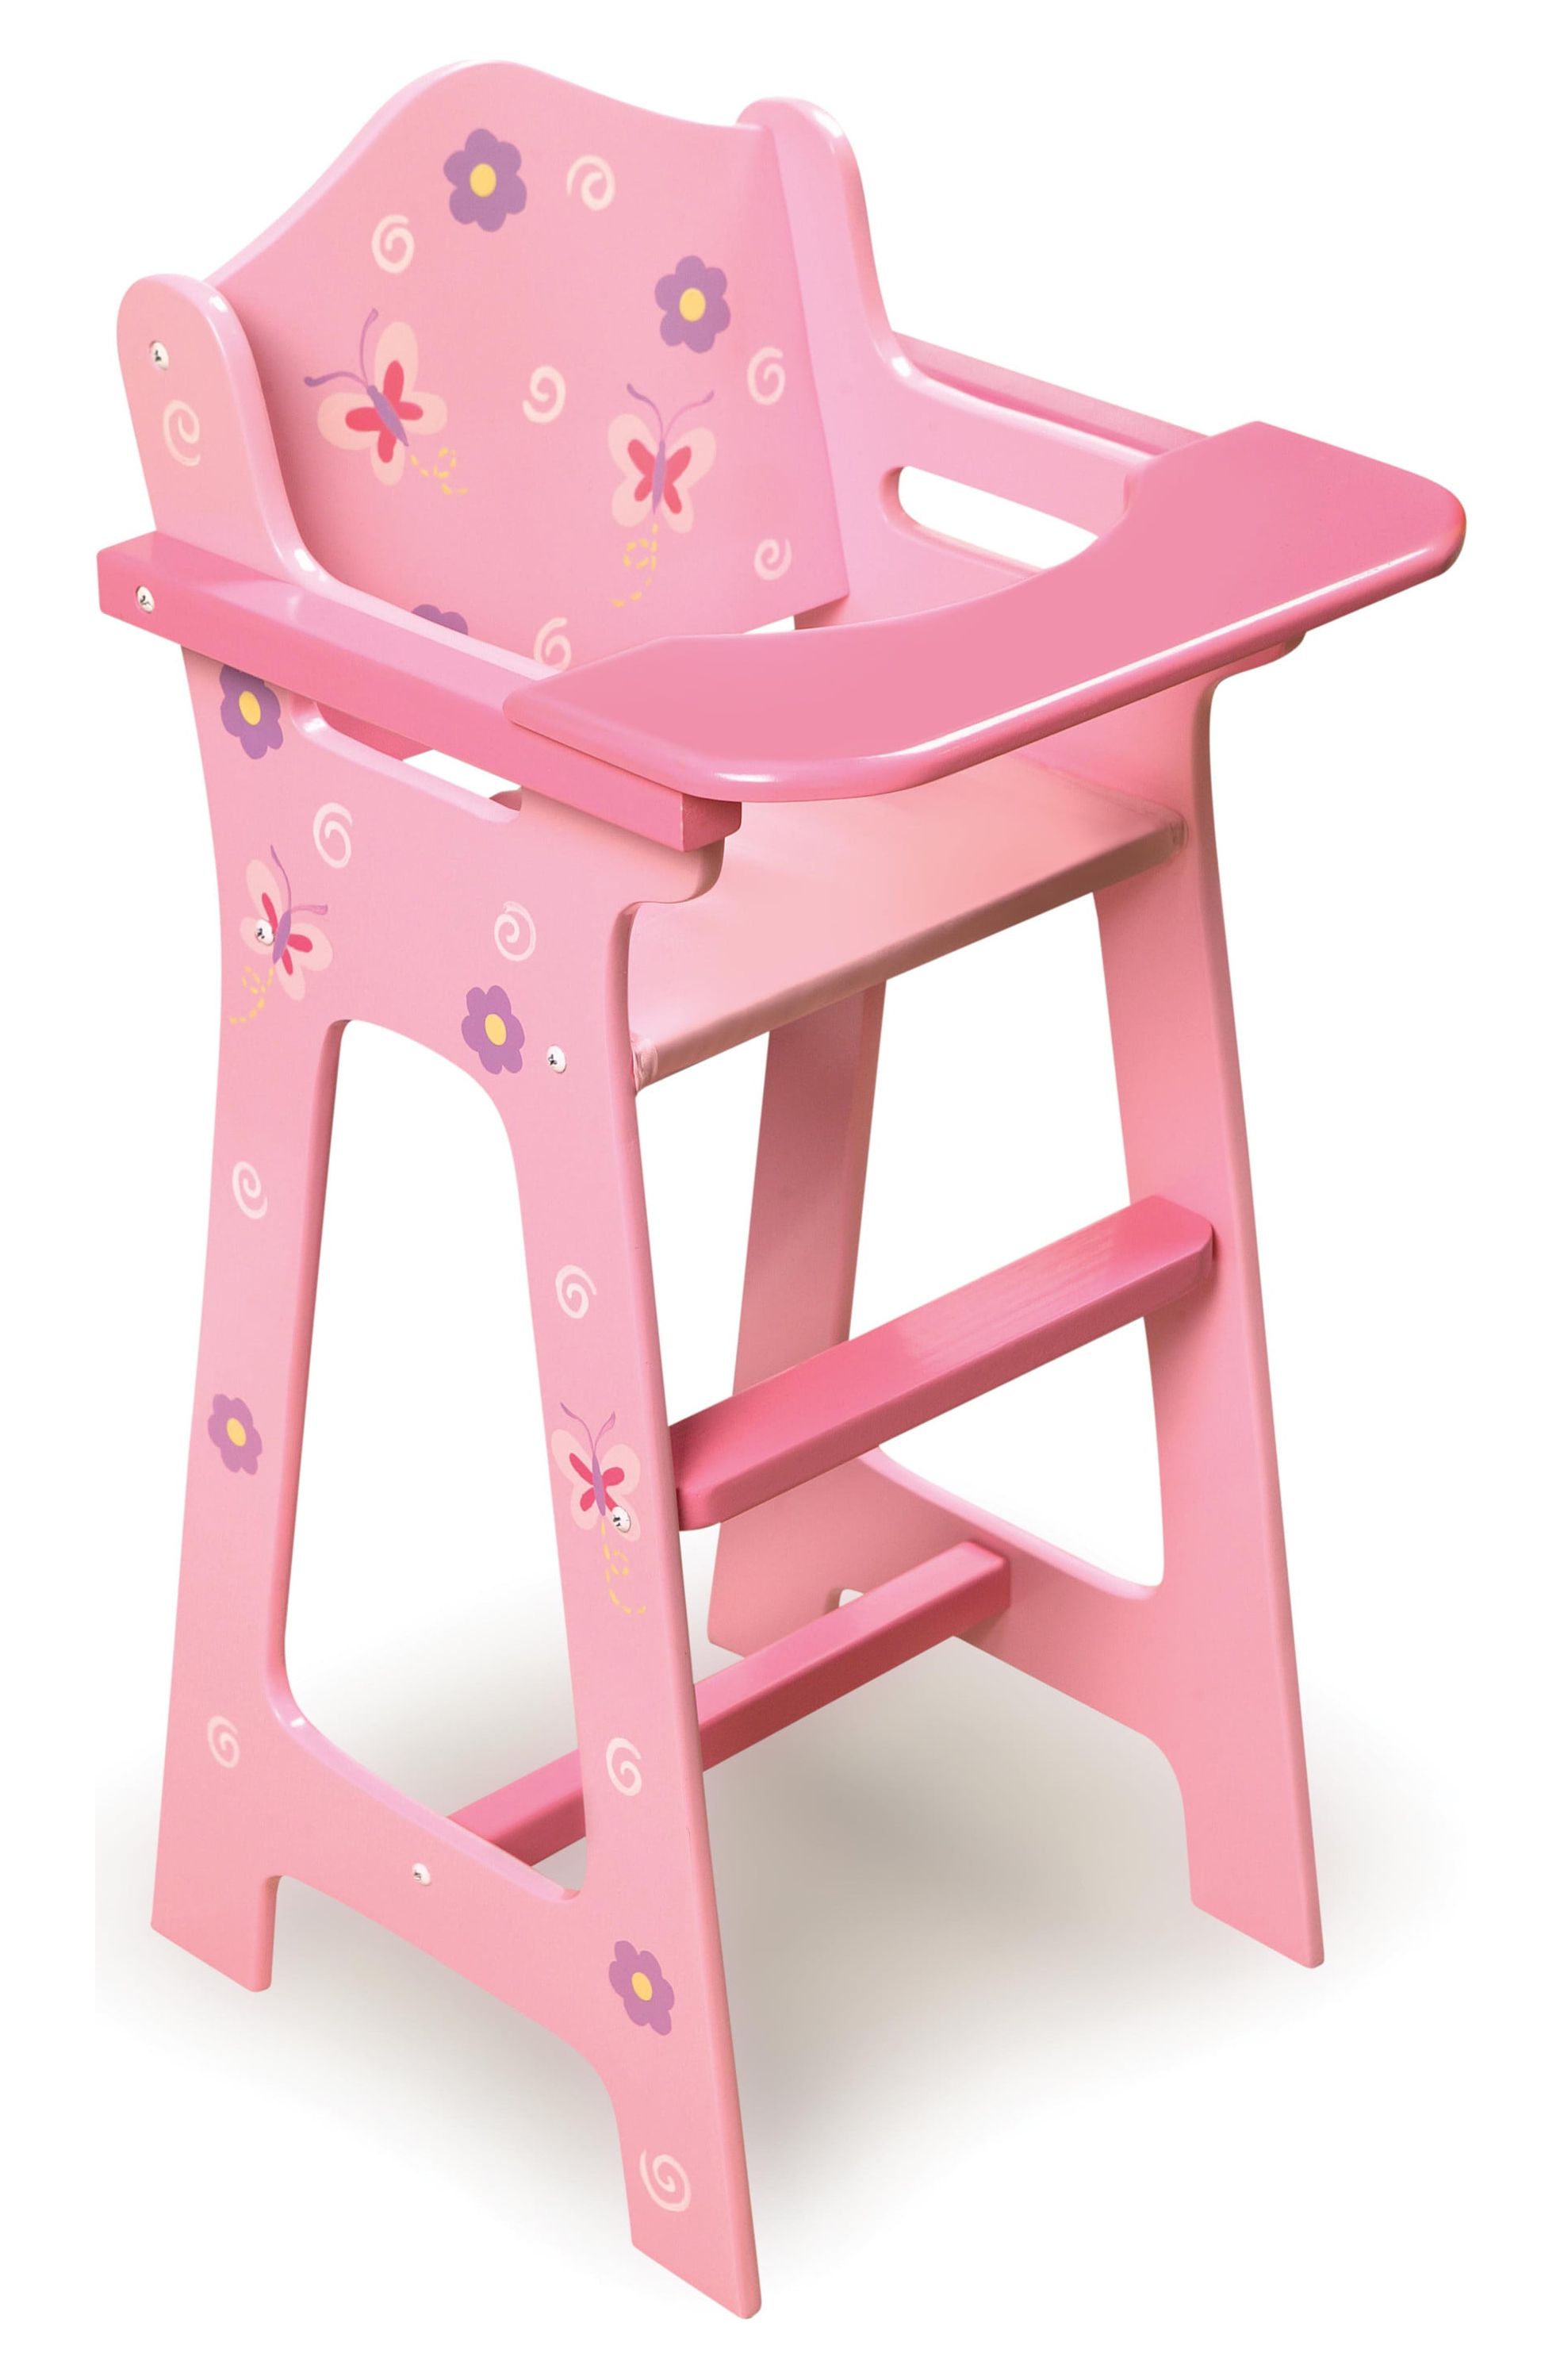 Badger Basket Blossoms and Butterflies Doll High Chair Feeding Seat for 18 inch Dolls - Pink - image 1 of 9